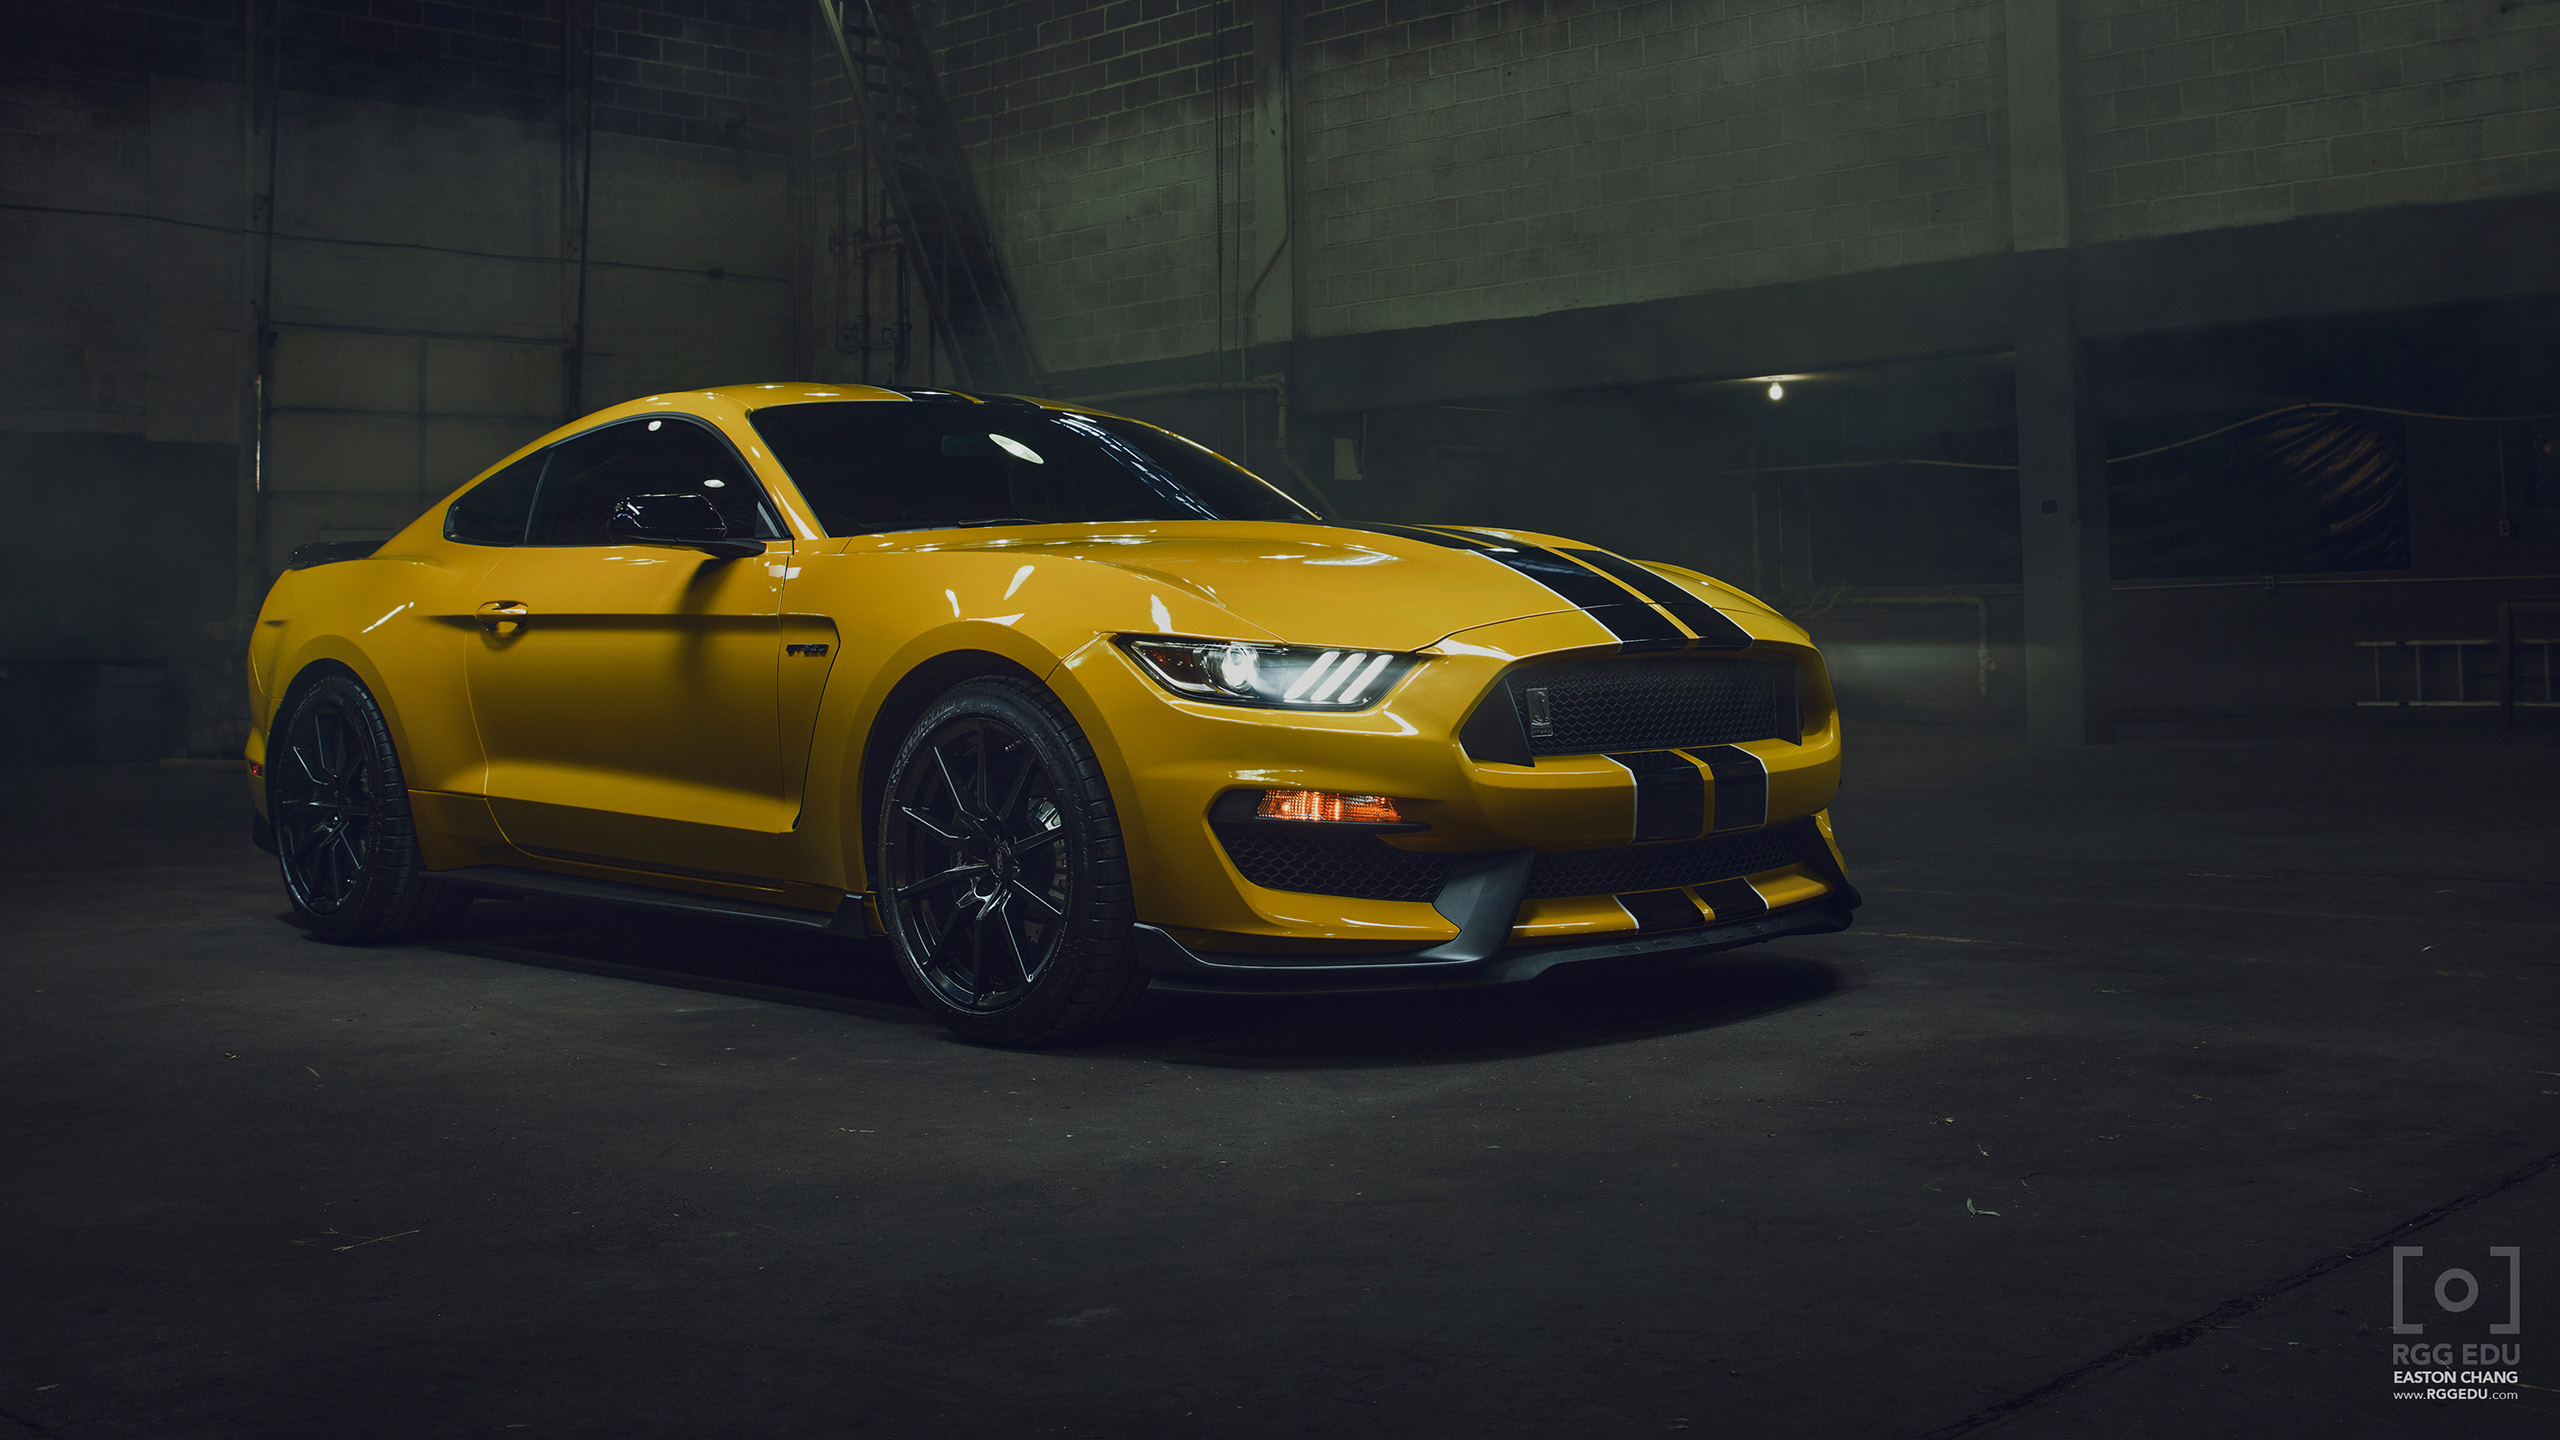 Free Download Your Ridiculously Awesome Ford Mustang Shelby Gt350 Wallpaper Is Here 2560x1440 For Your Desktop Mobile Tablet Explore 29 Ford Shelby Gt350 Wallpapers Ford Shelby Gt350 Wallpapers Ford